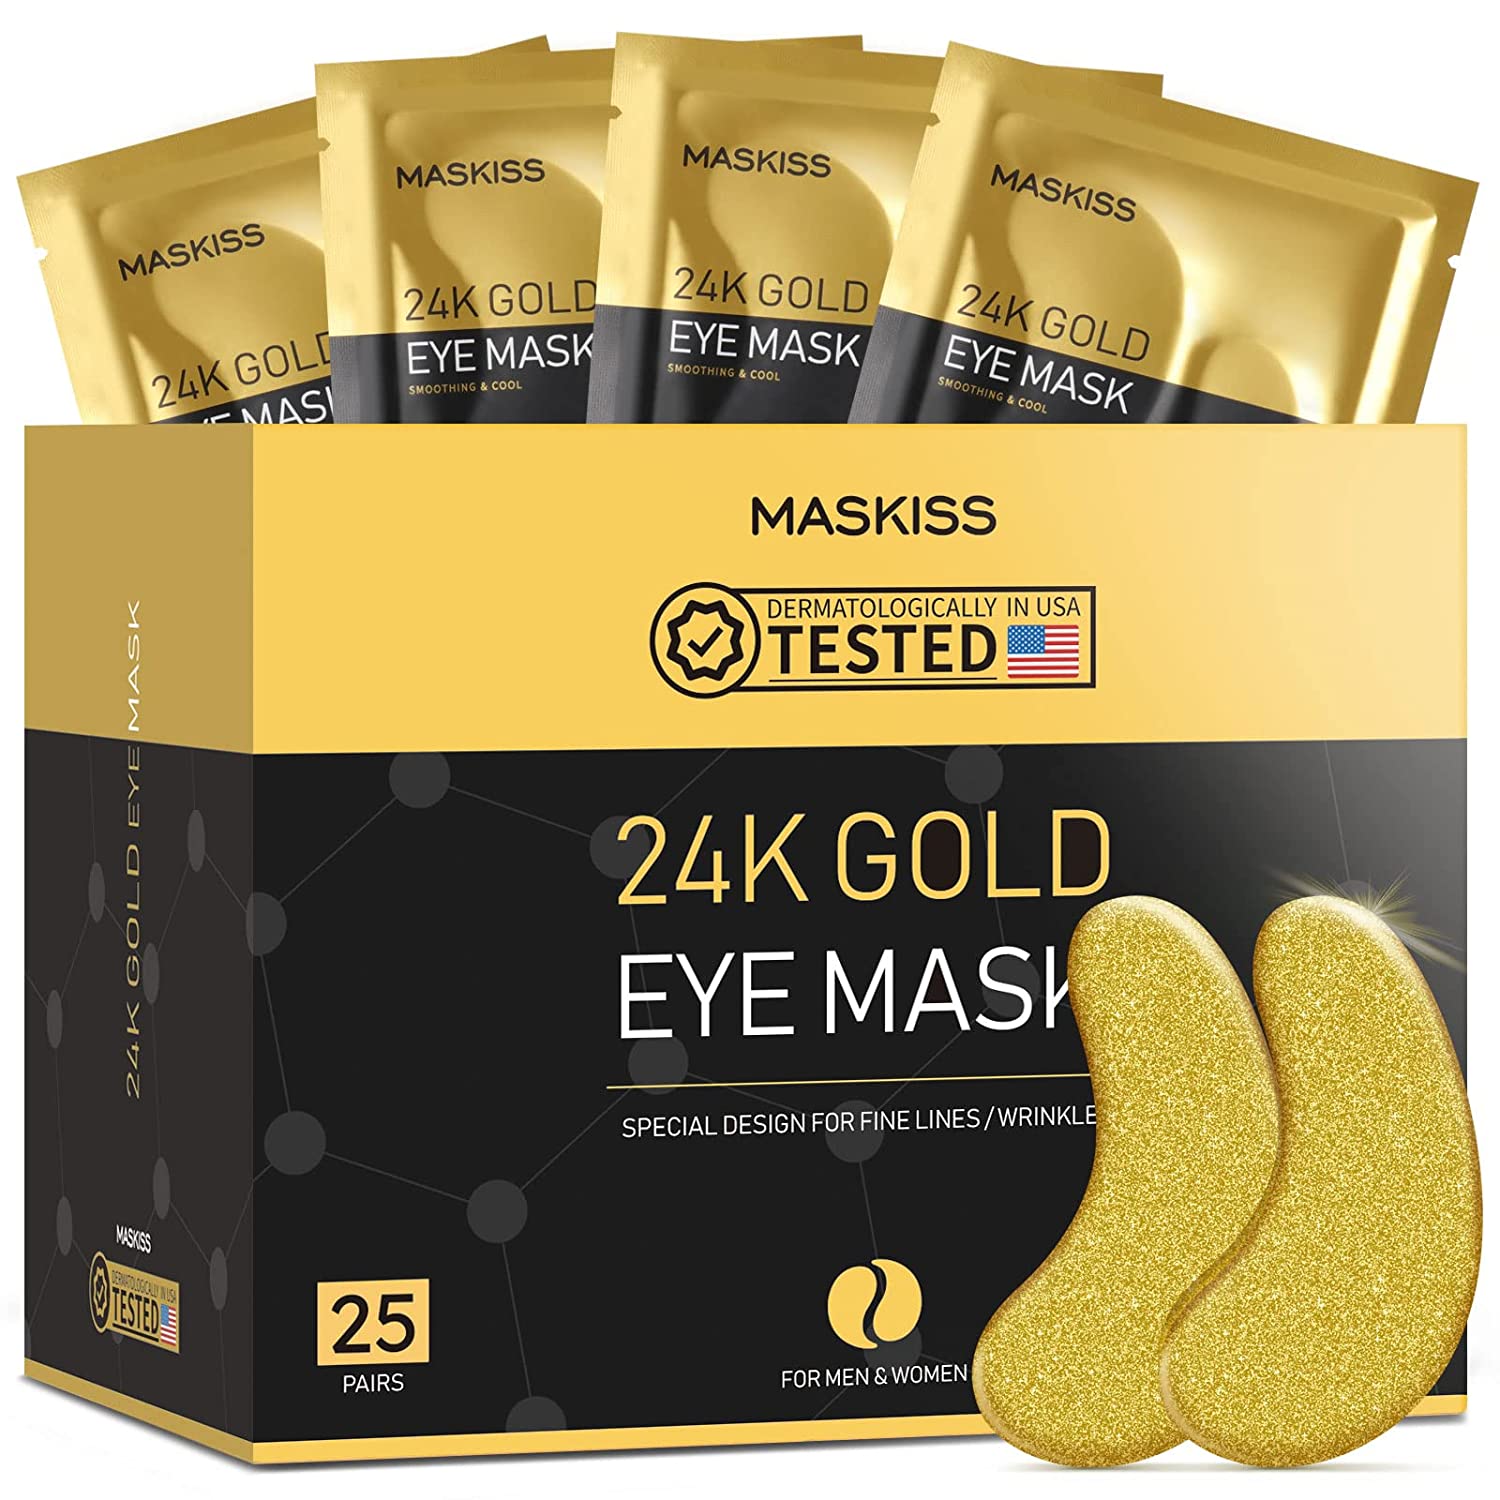 A box of 24 karat gold eye masks with examples of the packets inside plus an example of the eye mask itself.